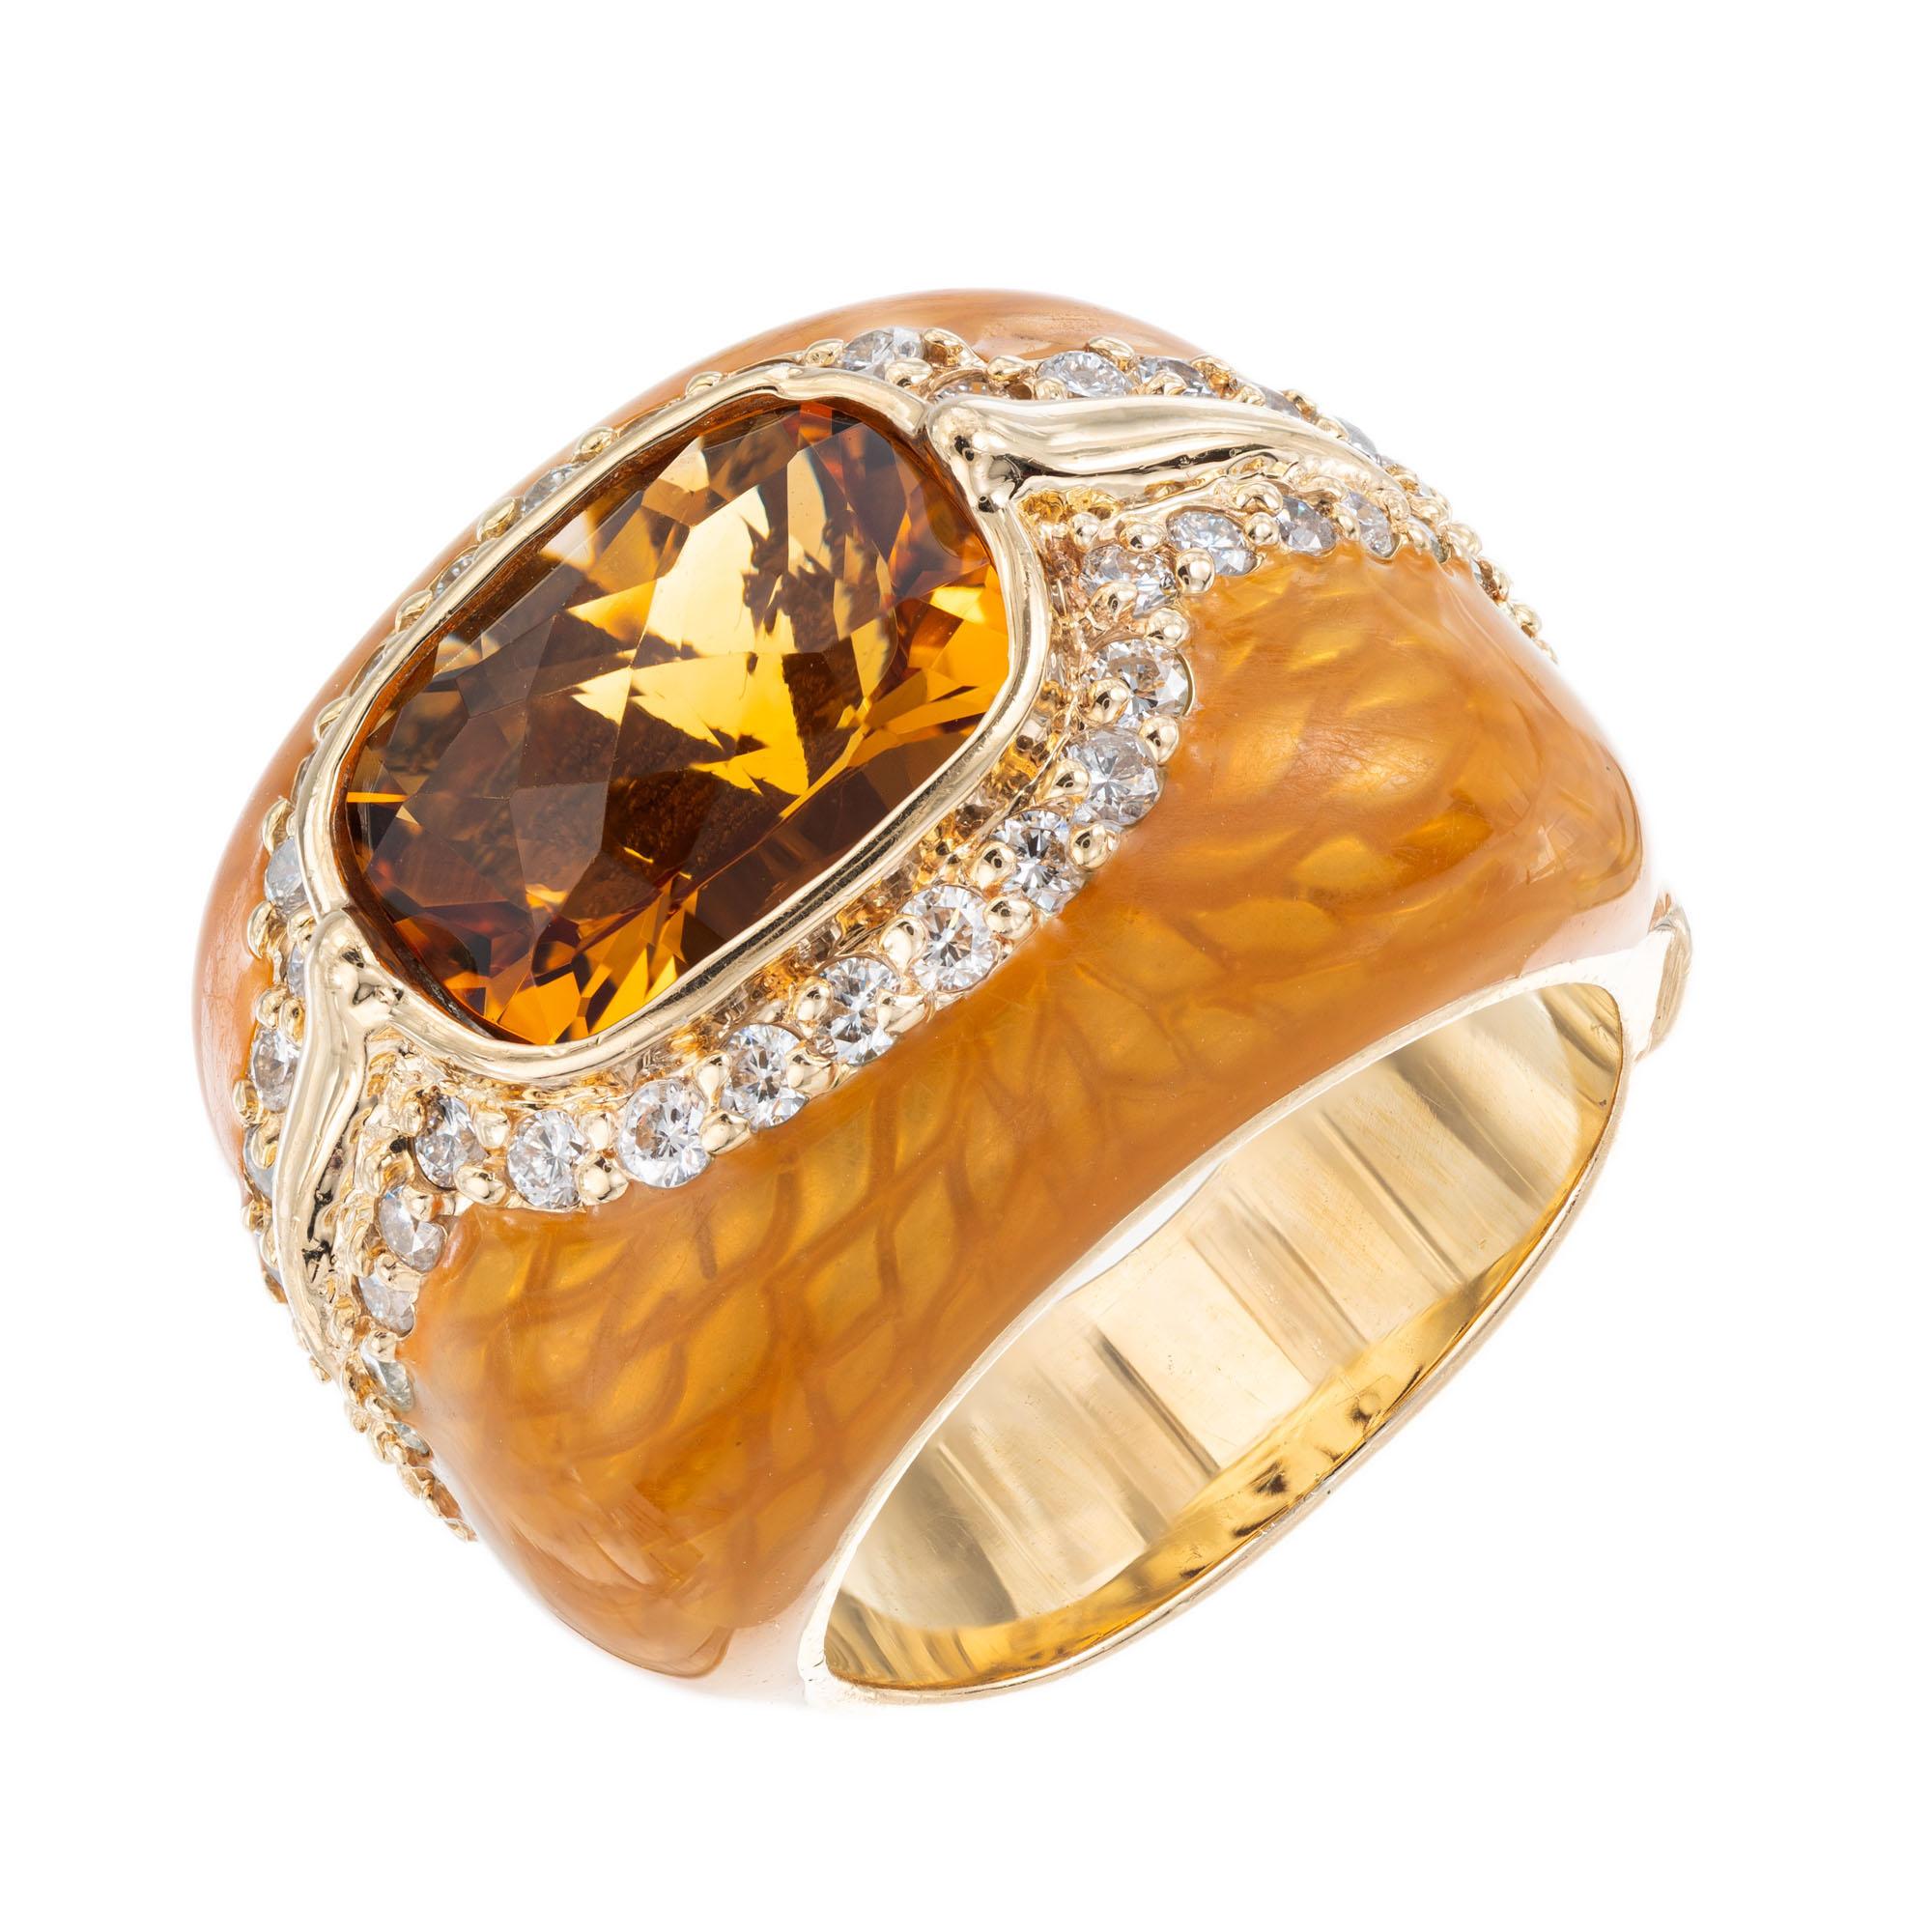 Haggai citrine and diamond cocktail ring. Oval center citrine with a halo of round diamonds in a 14k yellow gold enamel setting. Signed Haggai. Not sizable.

1 Oval citrine 3.00ct. 
44 round diamonds, .44ct. F, VS 
Size 4 - Not sizable
14k Yellow